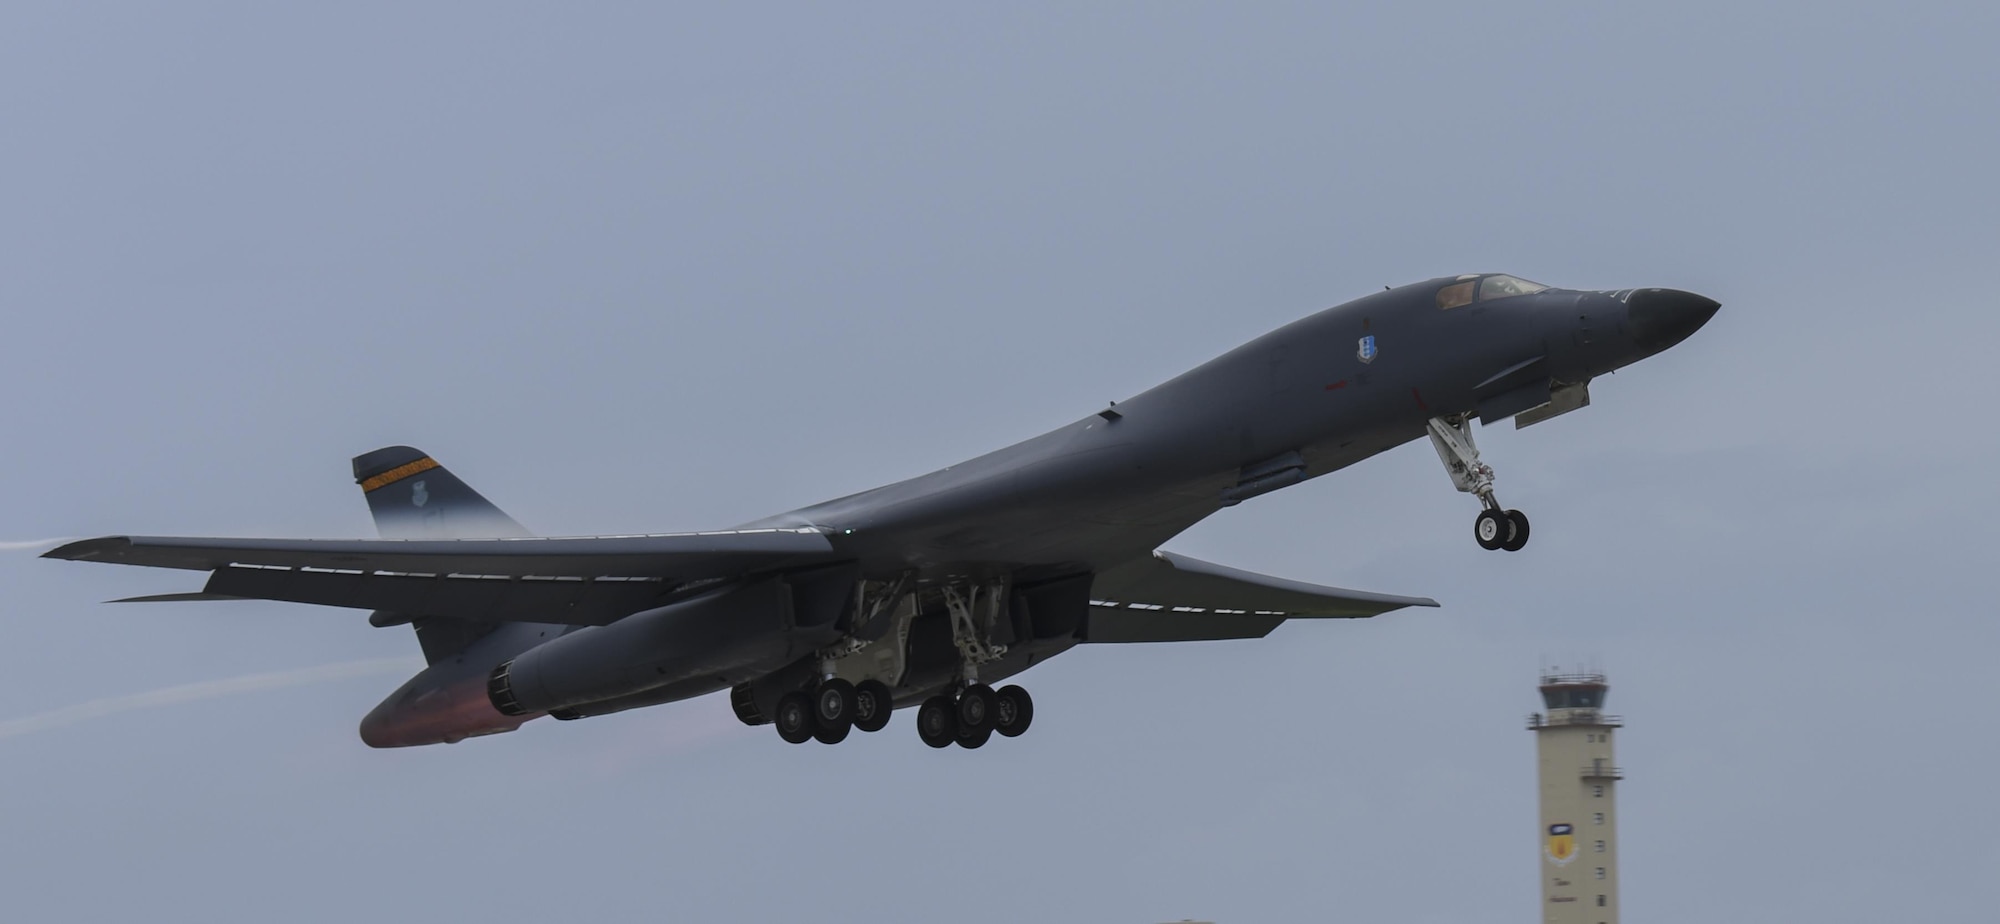 A U.S. Air Force B-1 Lancer takes off at Andersen Air Force Base, Guam, for an integrated bomber operation Aug.17, 2016. This mission marks the first time in history that all three of Air Force Global Strike Command's strategic bomber aircraft are simultaneously conducting integrated operations in the U.S. Pacific Command area of operations. As of Aug. 15, the B-1 Lancer will be temporarily deployed to Guam in support of U.S. Pacific Command's Continuous Bomber Presence mission. (U.S. Air Force photo by Tech Sgt Richard P. Ebensberger/Released)